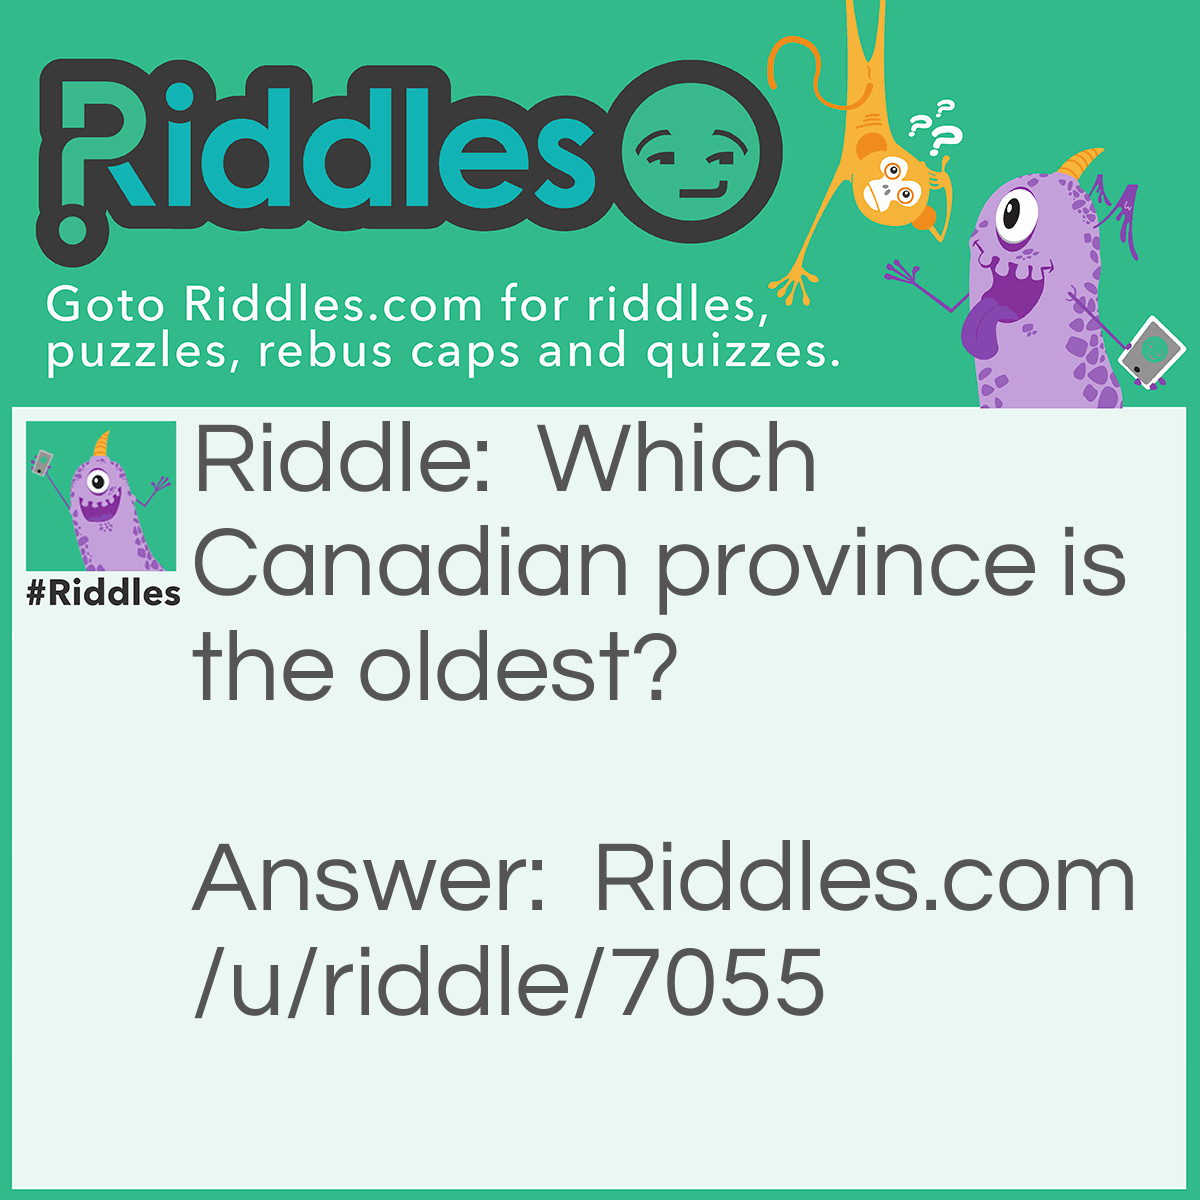 Riddle: Which Canadian province is the oldest? Answer: British Columbia, because BC also means "Before Christ"